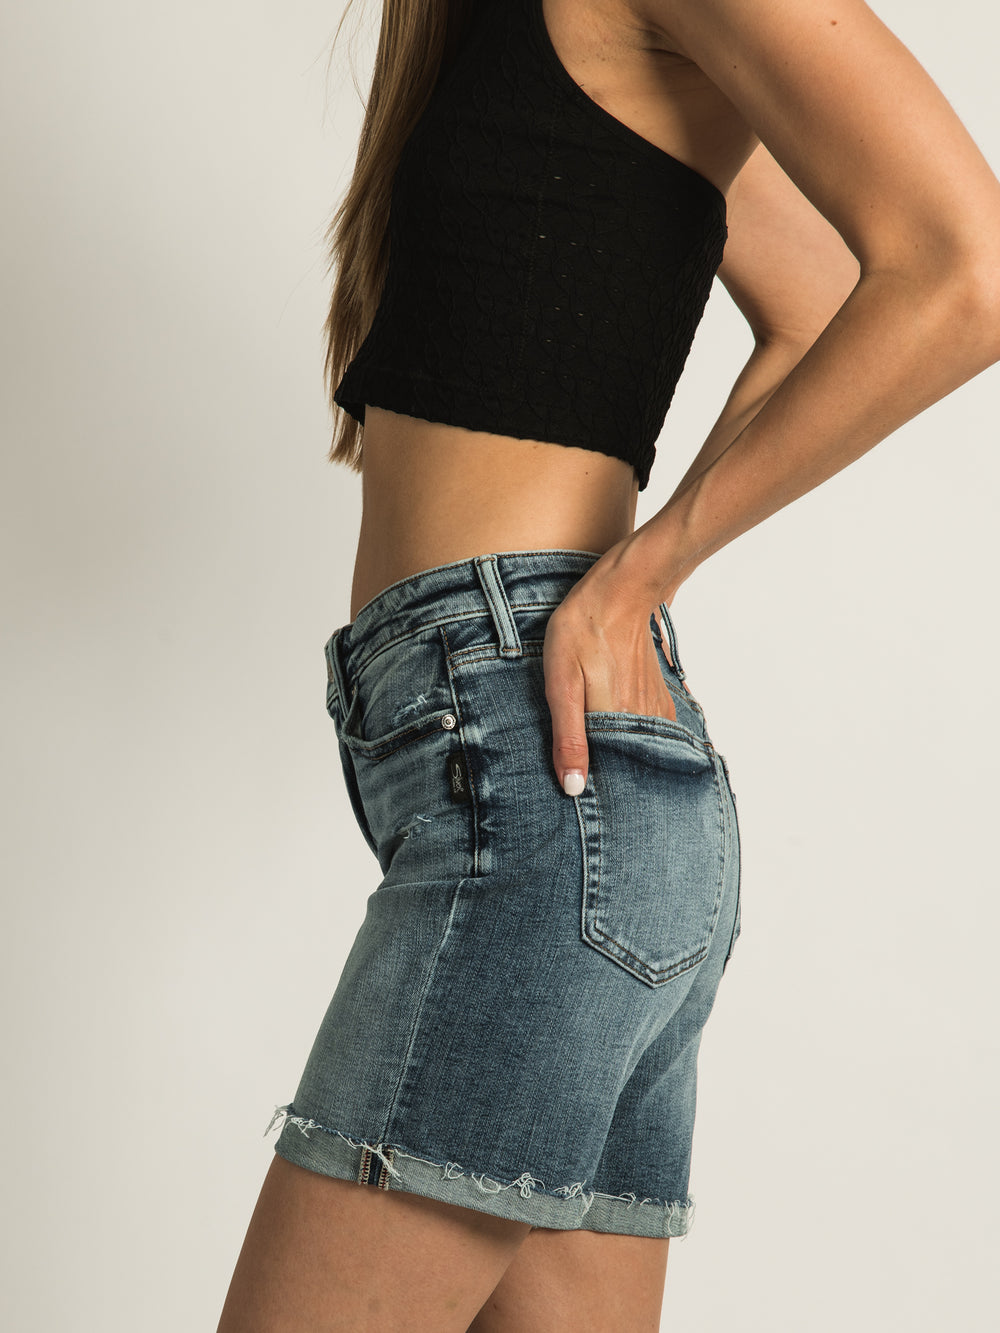 SILVER JEANS SURE THING LONG SHORT - CLEARANCE